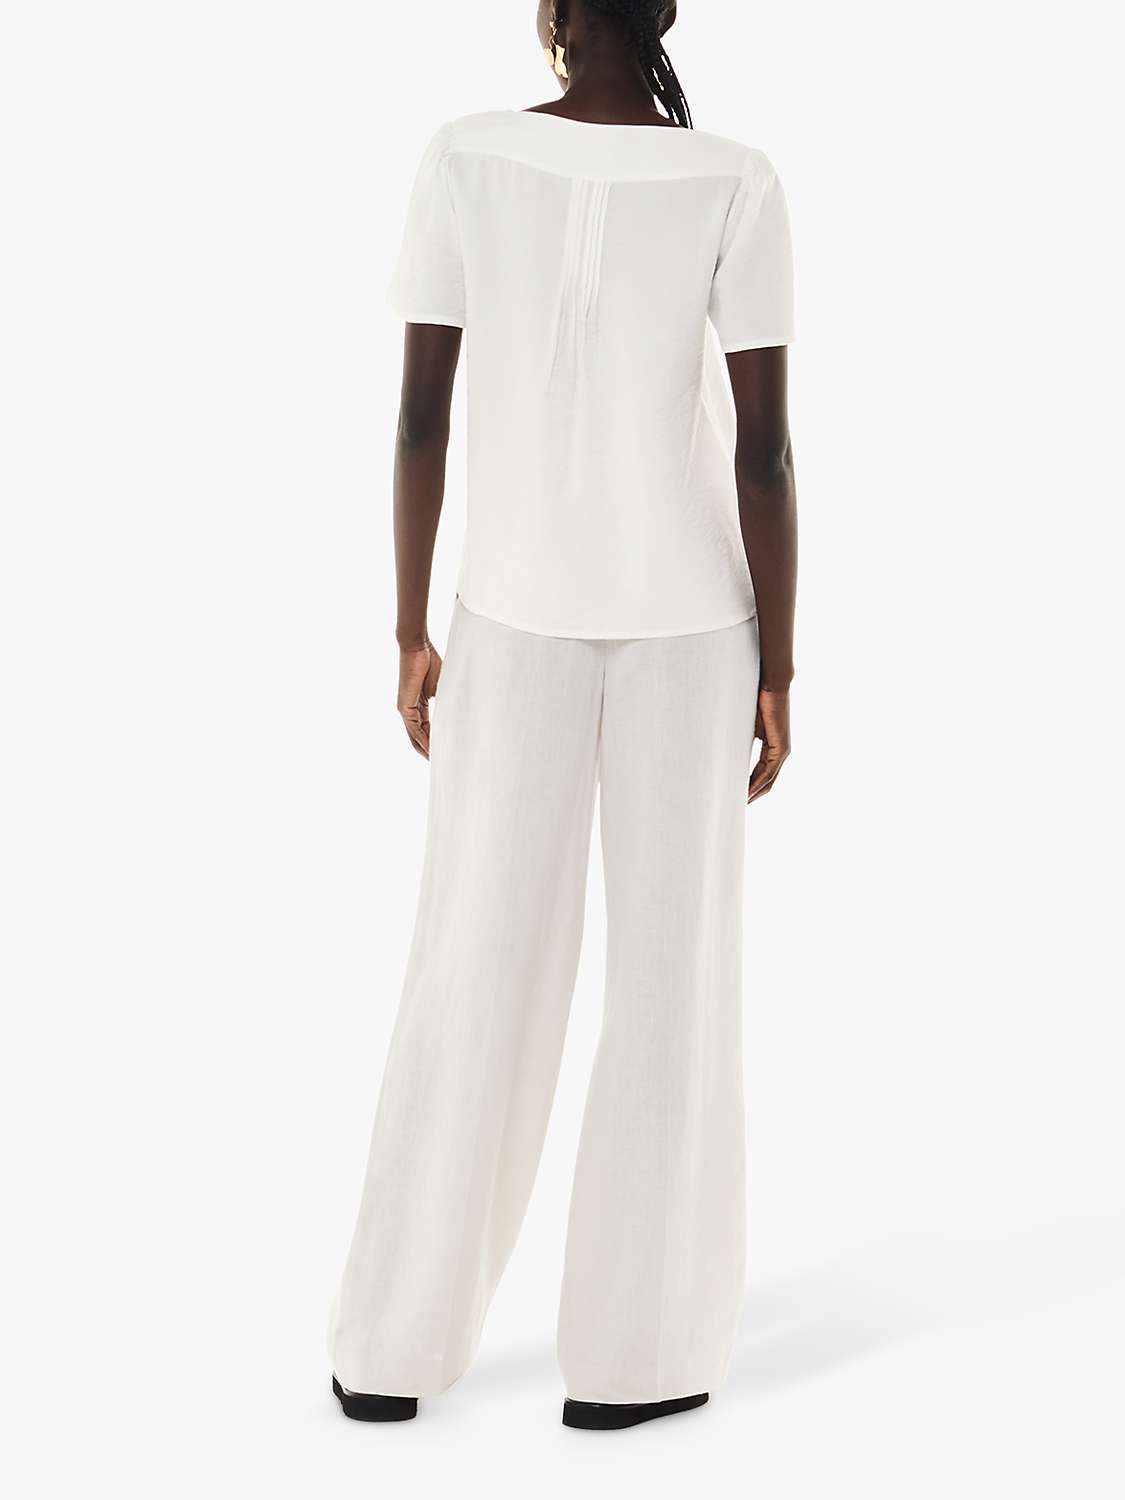 Buy Whistles Lily Square Neck Blouse, White Online at johnlewis.com